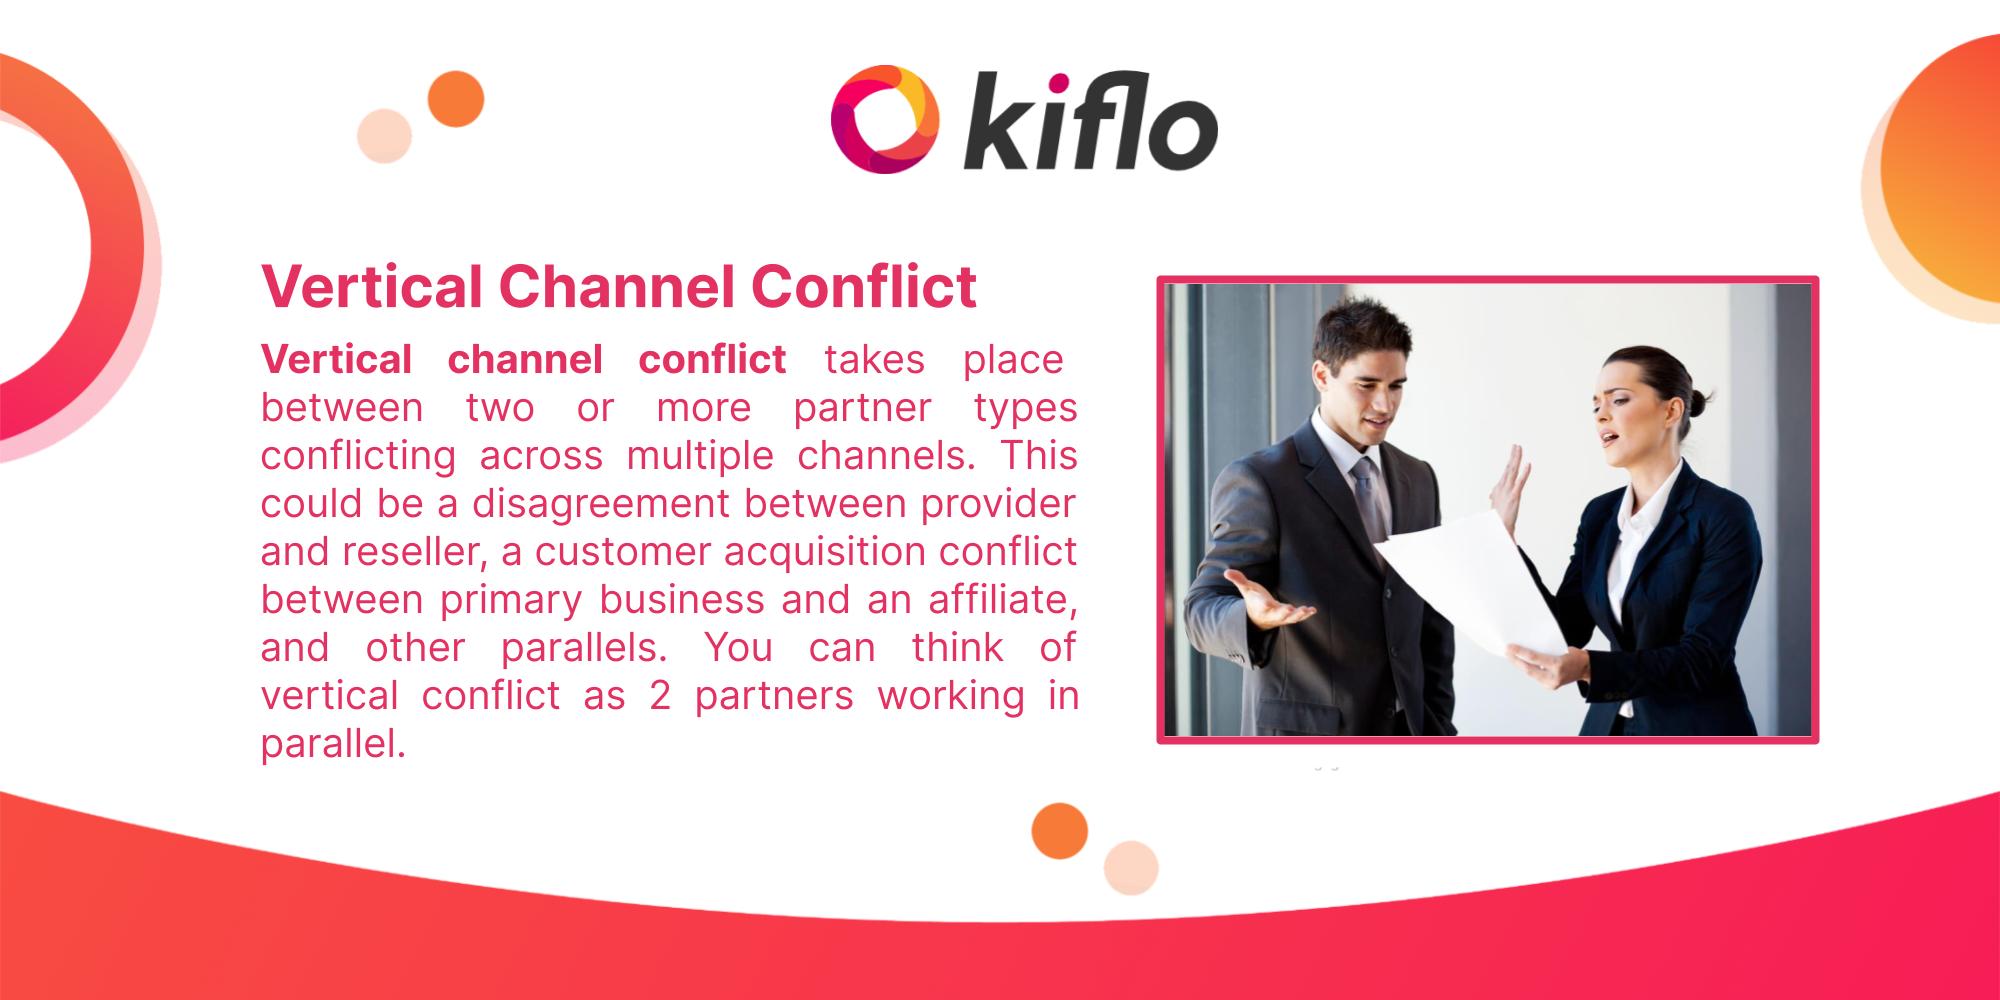 Vertical Channel Conflict